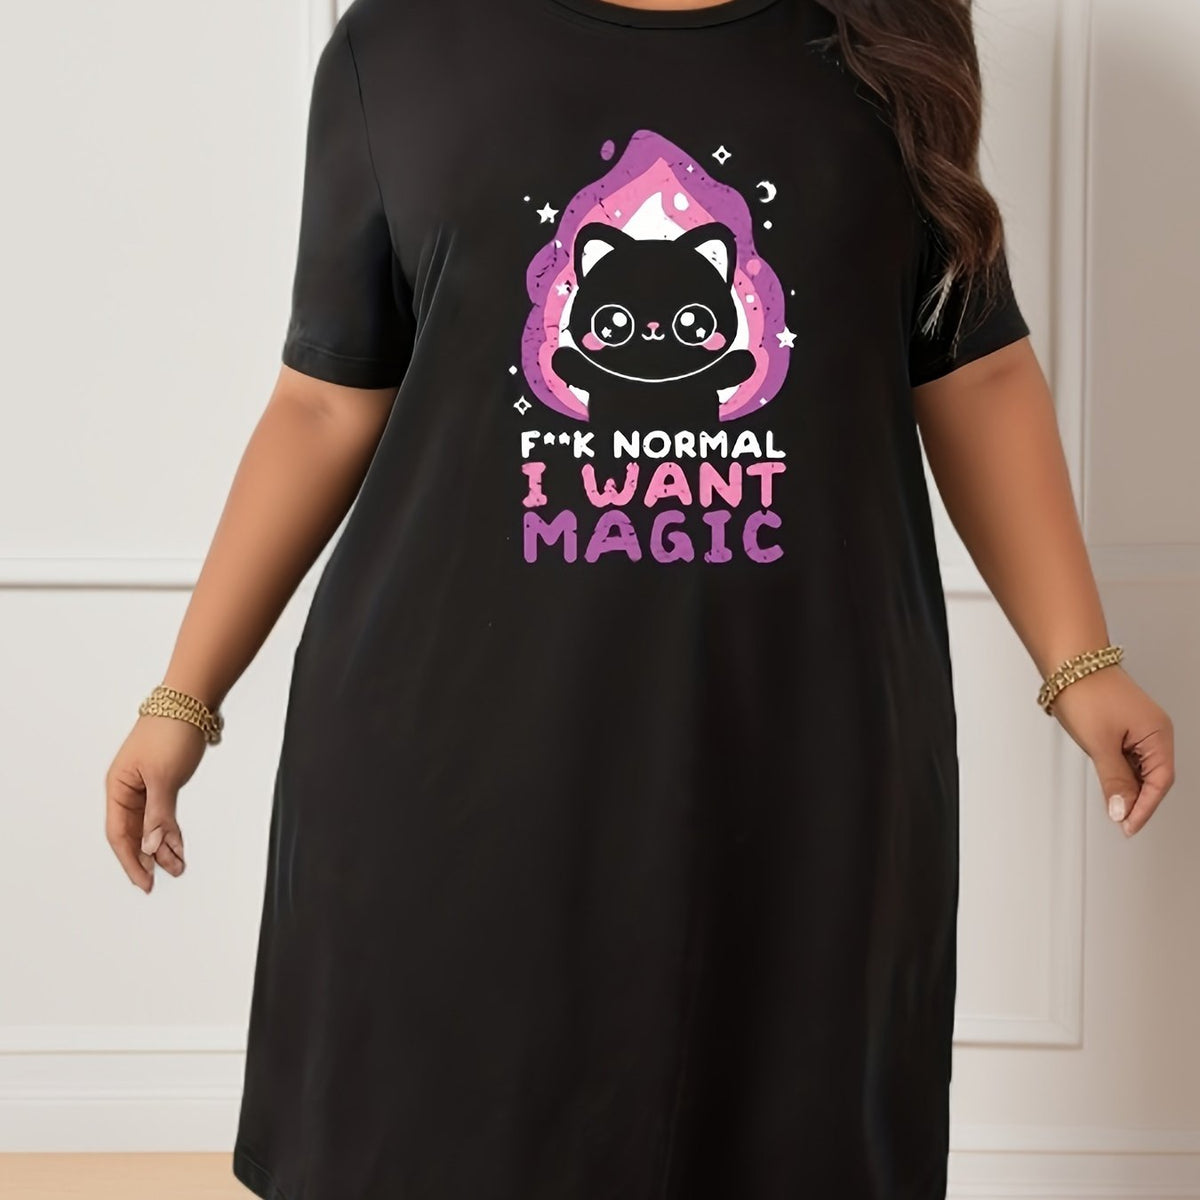 I want Magic Letter Print Women's Plus Size Casual Loungewear Dress: Comfortable Short Sleeve Nightgown for Stylish Relaxation